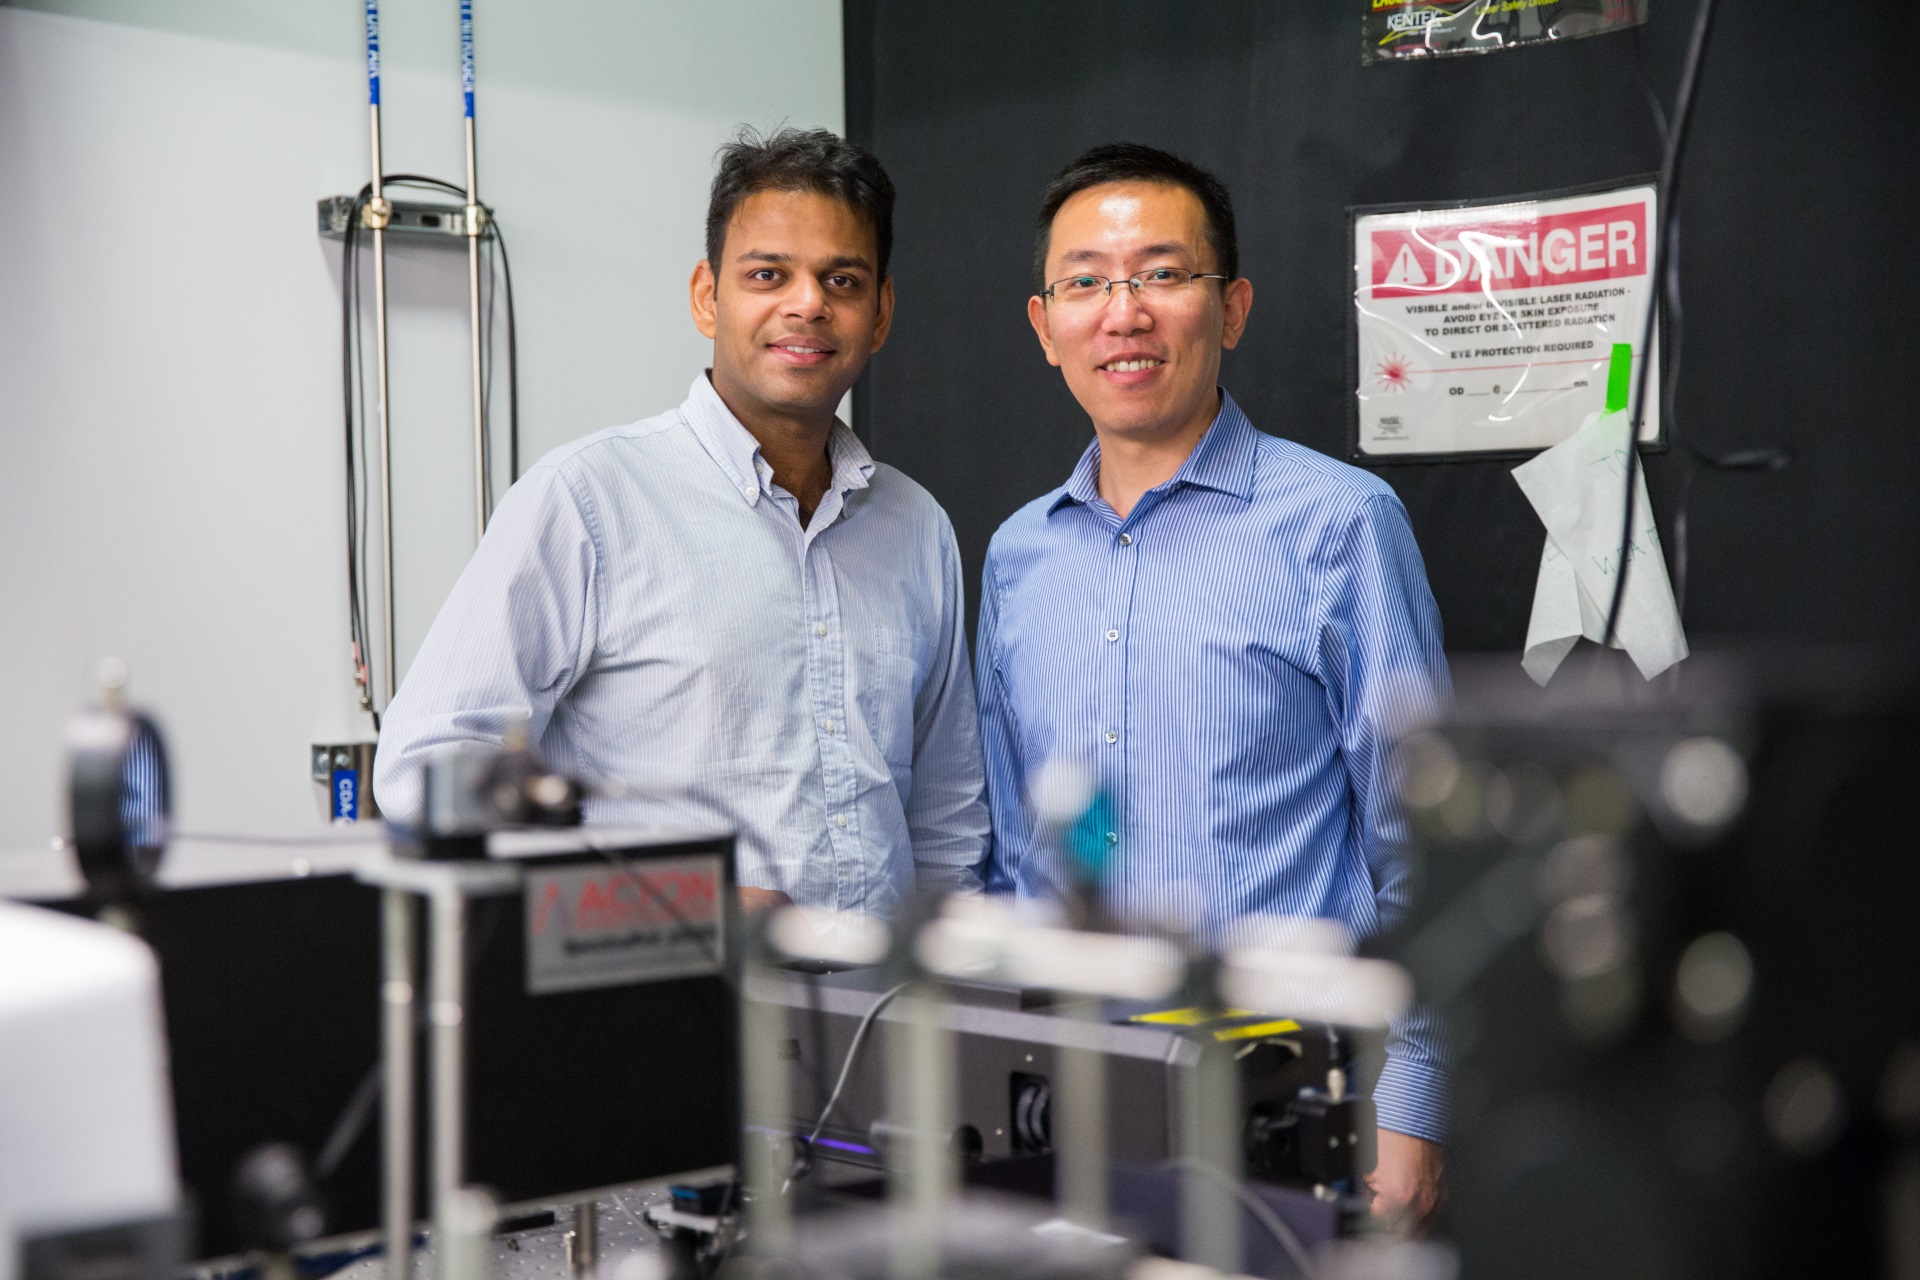 A pair of studies published in Science, led by Liang Feng and Ritesh Agarwal, describe novel ways of increasing information density in optical communication networks.